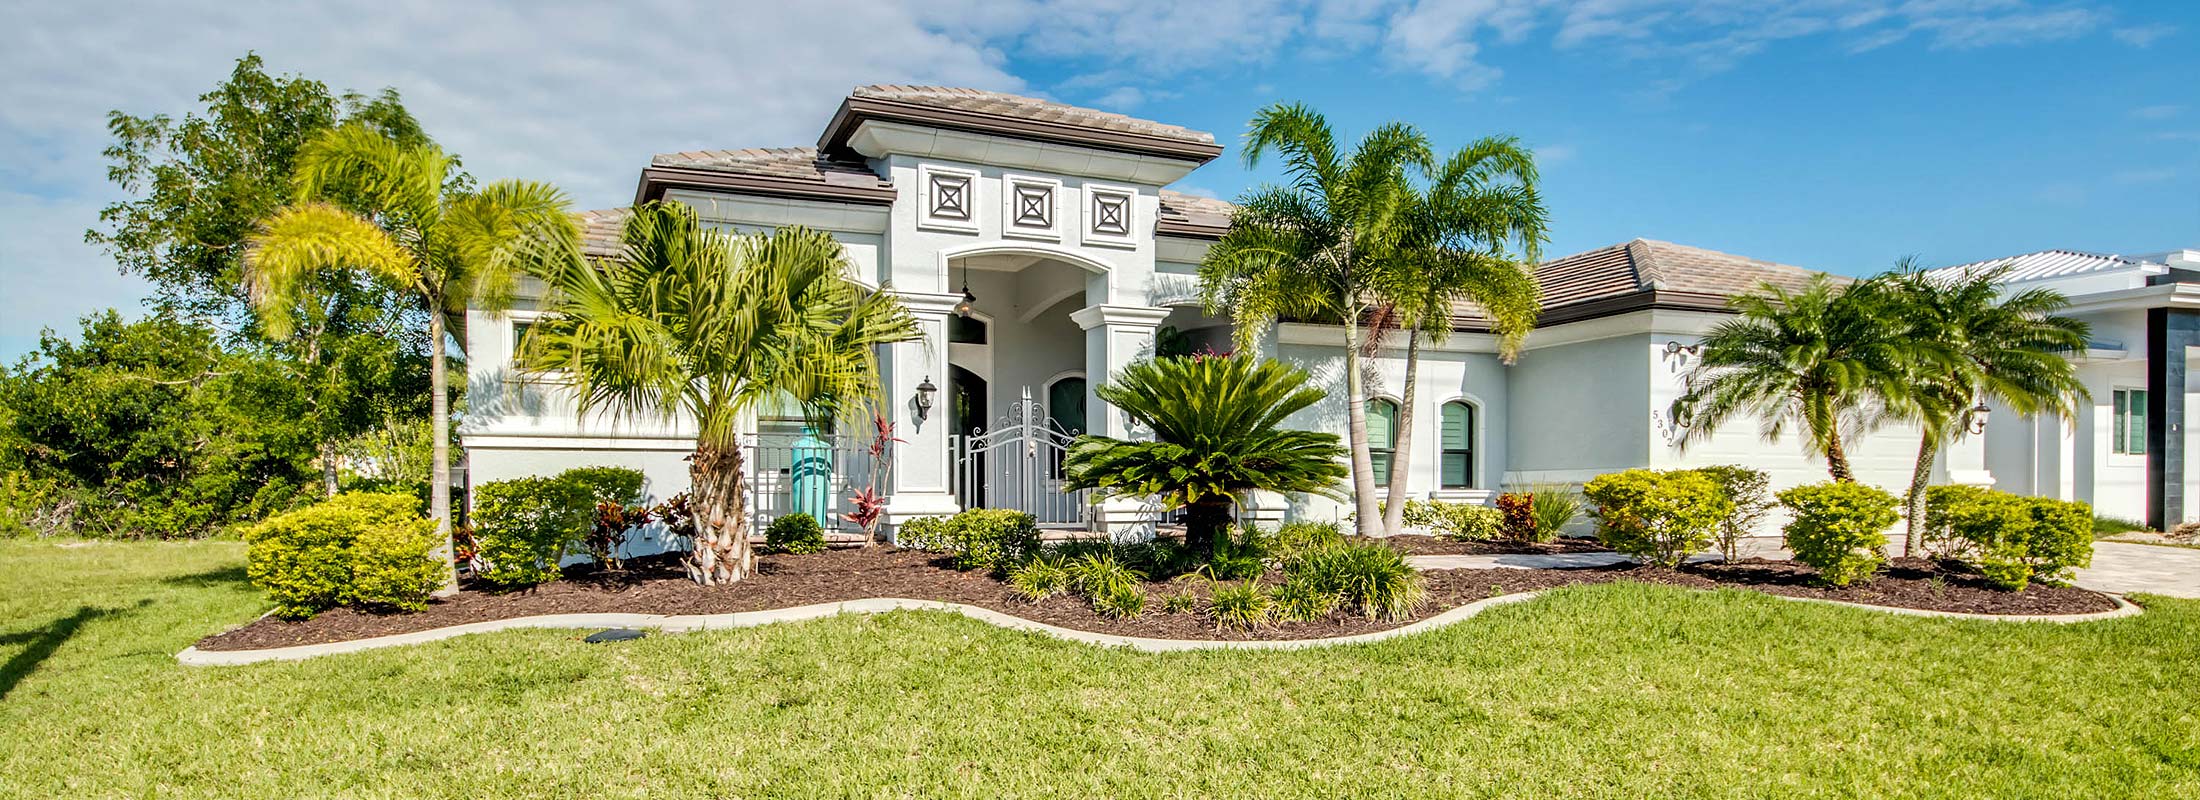 NMB Florida Immobilien